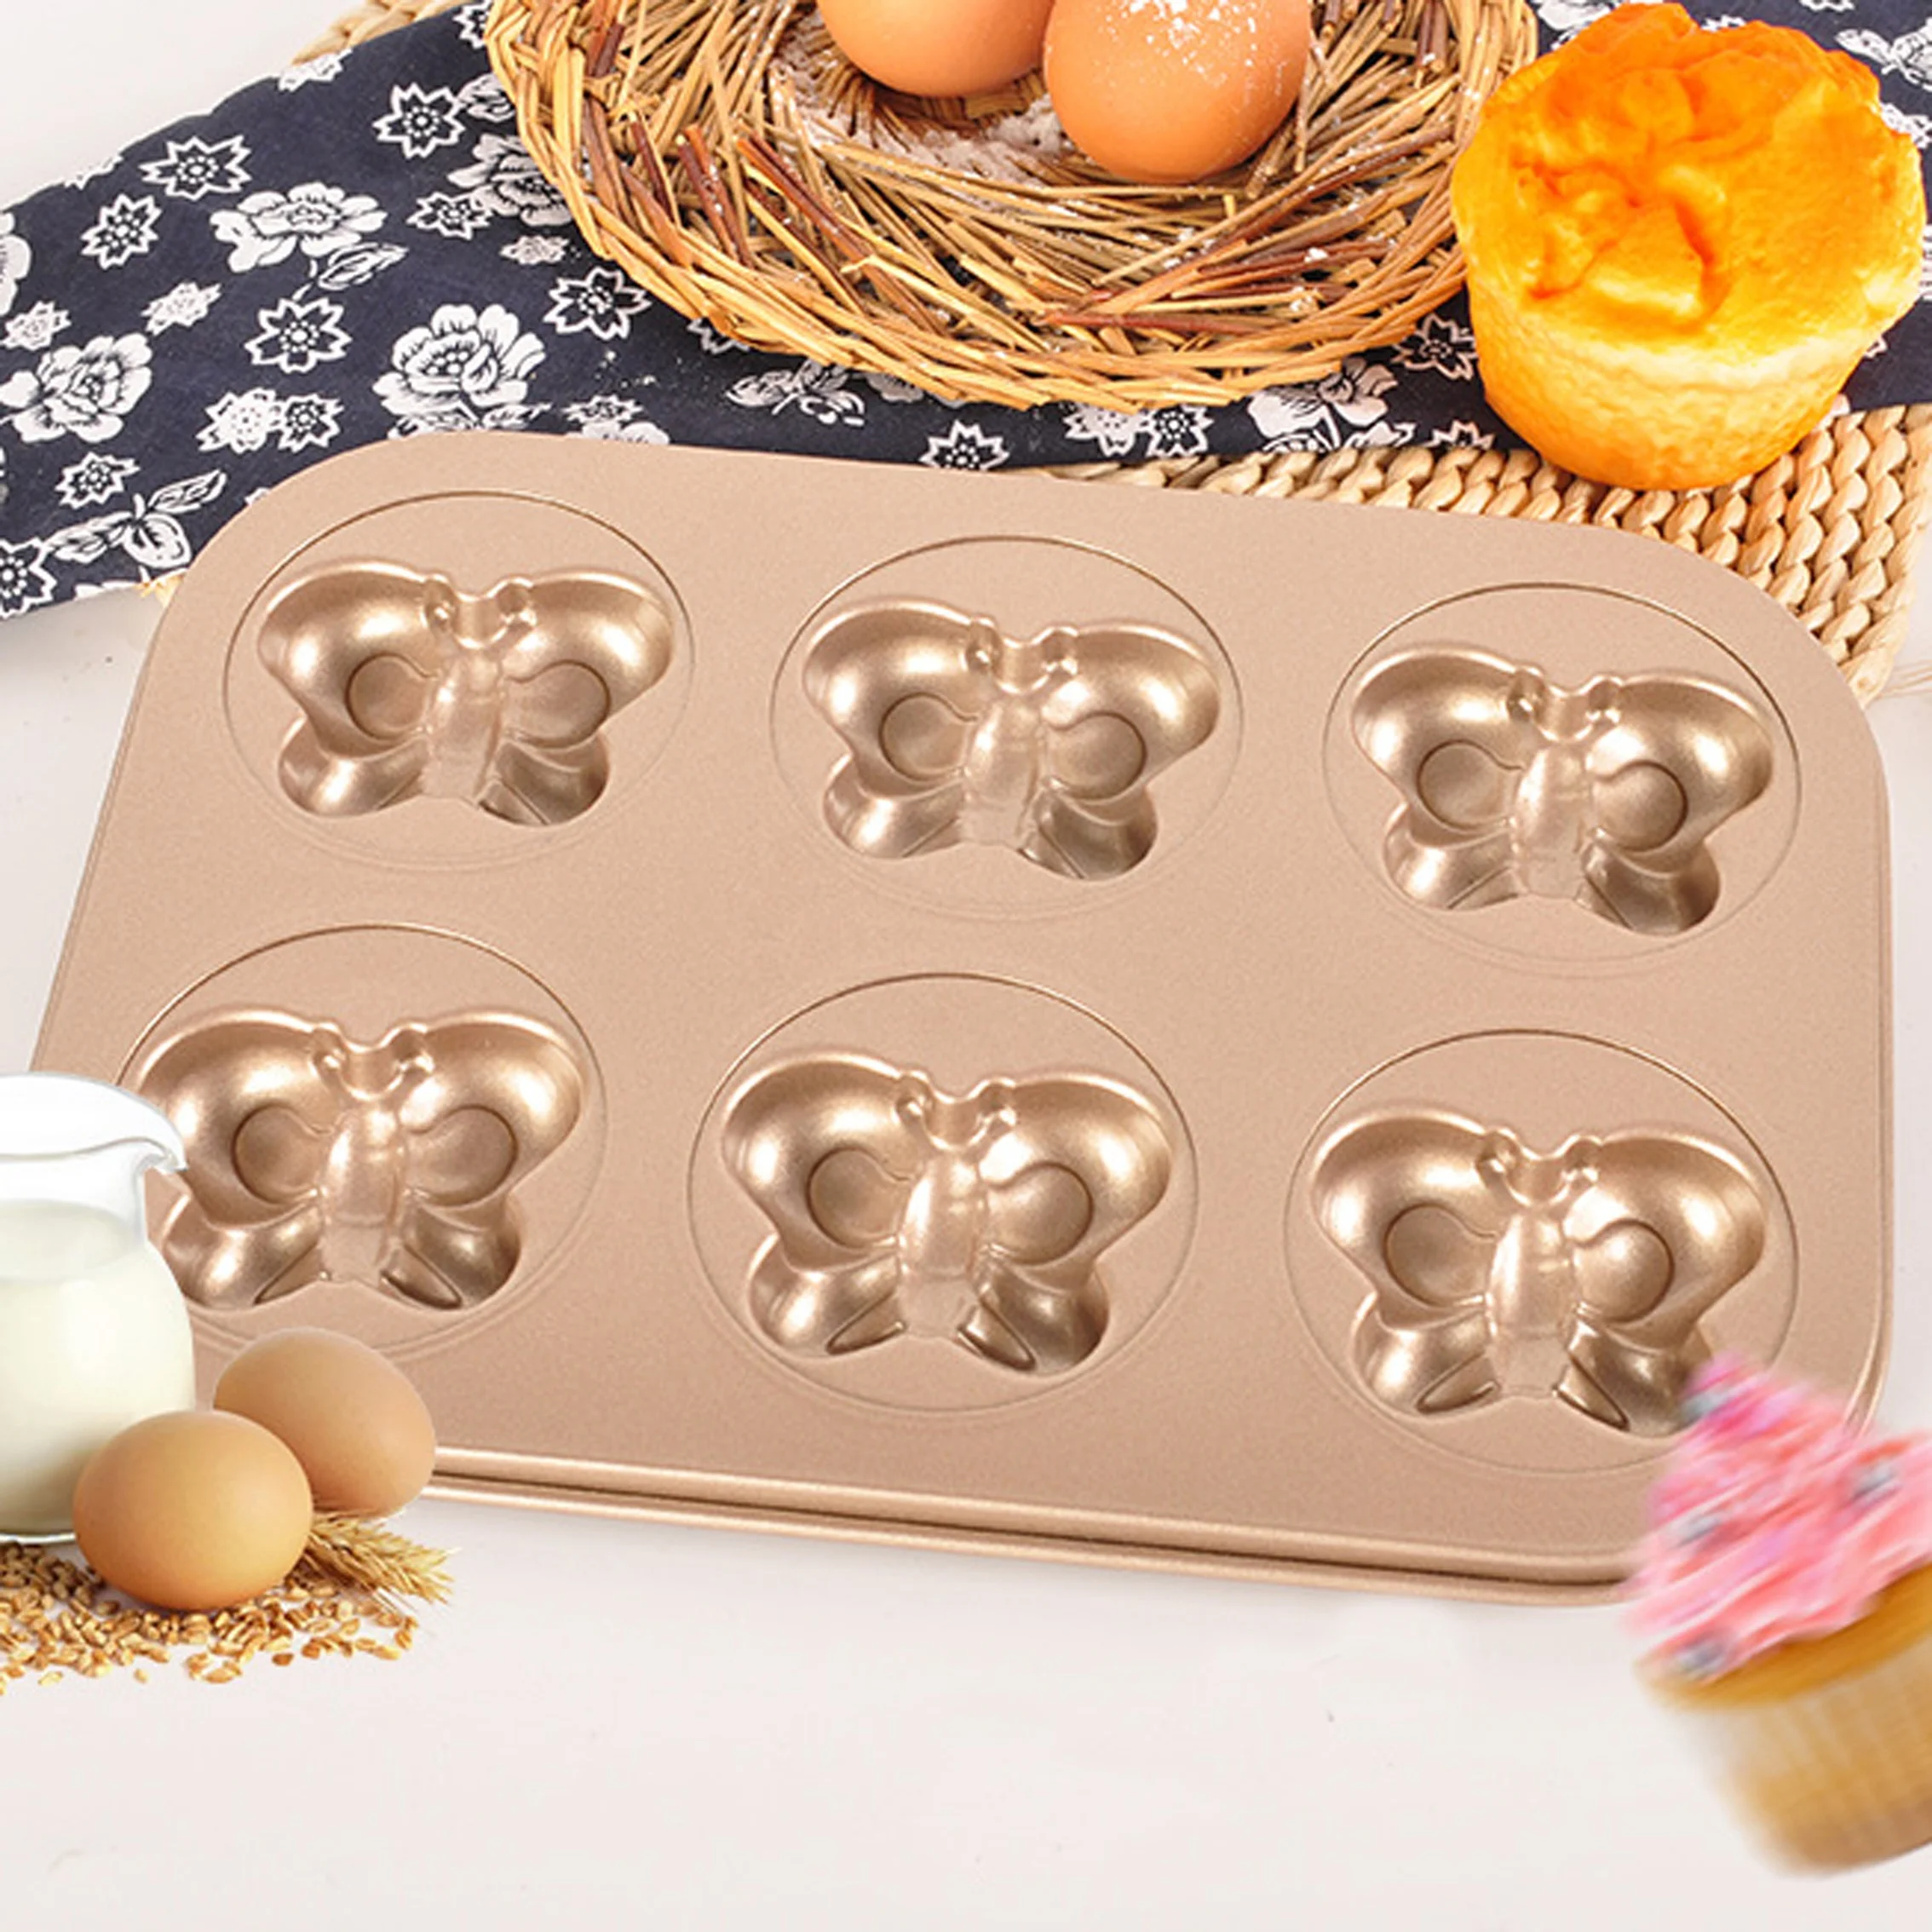 12 Hole multi size Non Stick Carbon Steel Butterfly Shaped 3D Cake Mold Baking Pans cake Helper Aluminum alloy cake molds